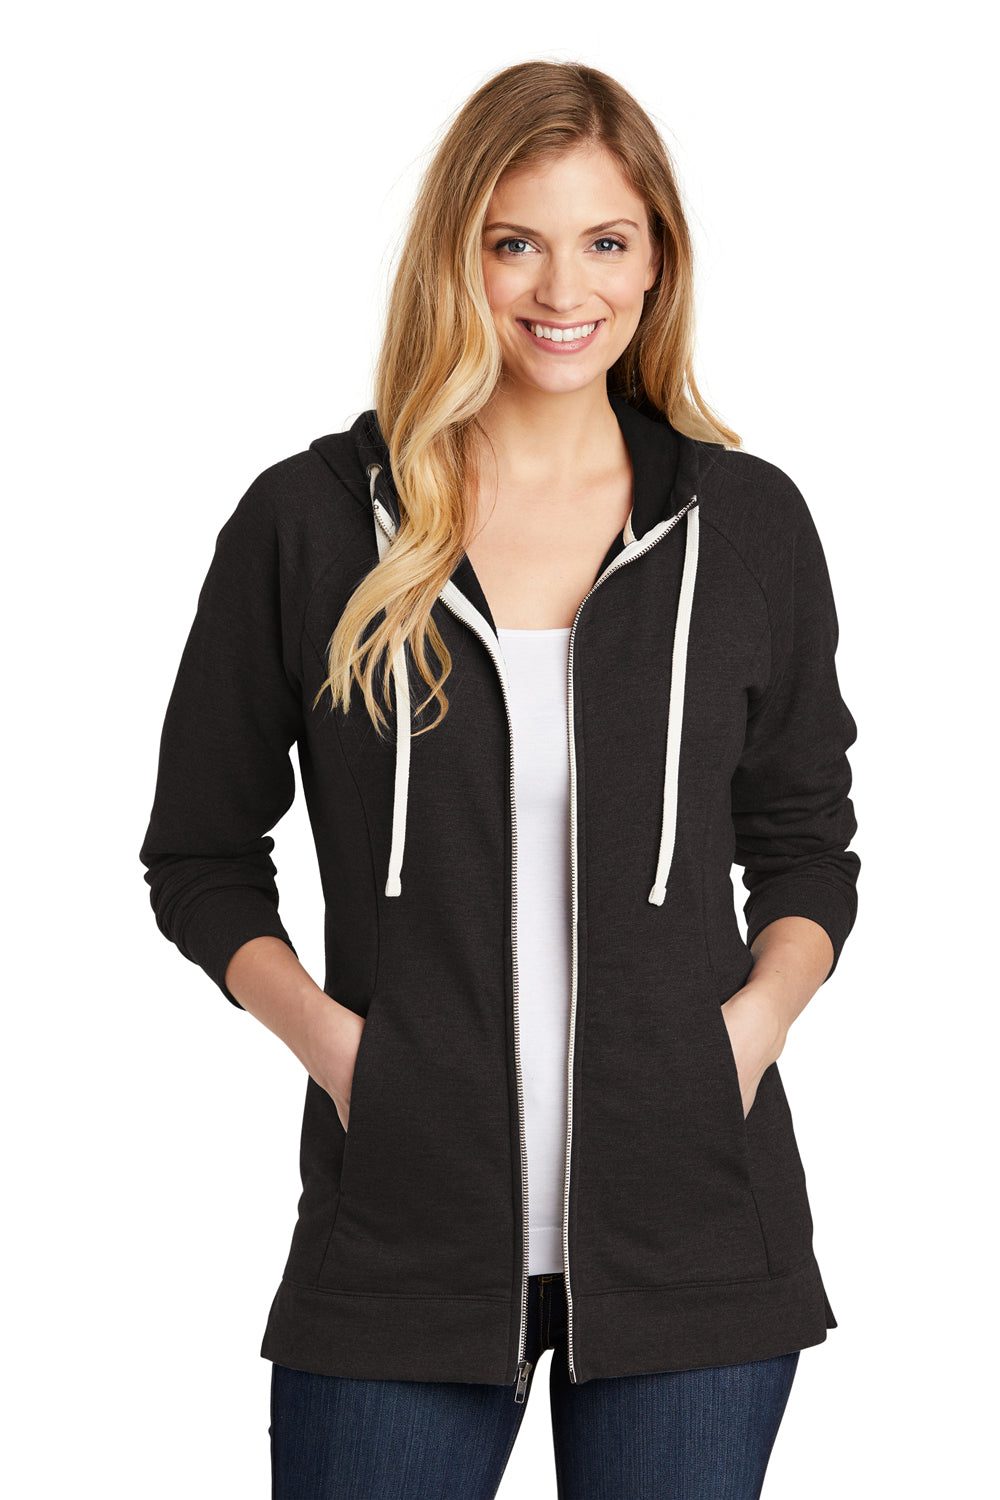 District DT456 Womens Perfect French Terry Full Zip Hooded Sweatshirt Hoodie Black Front